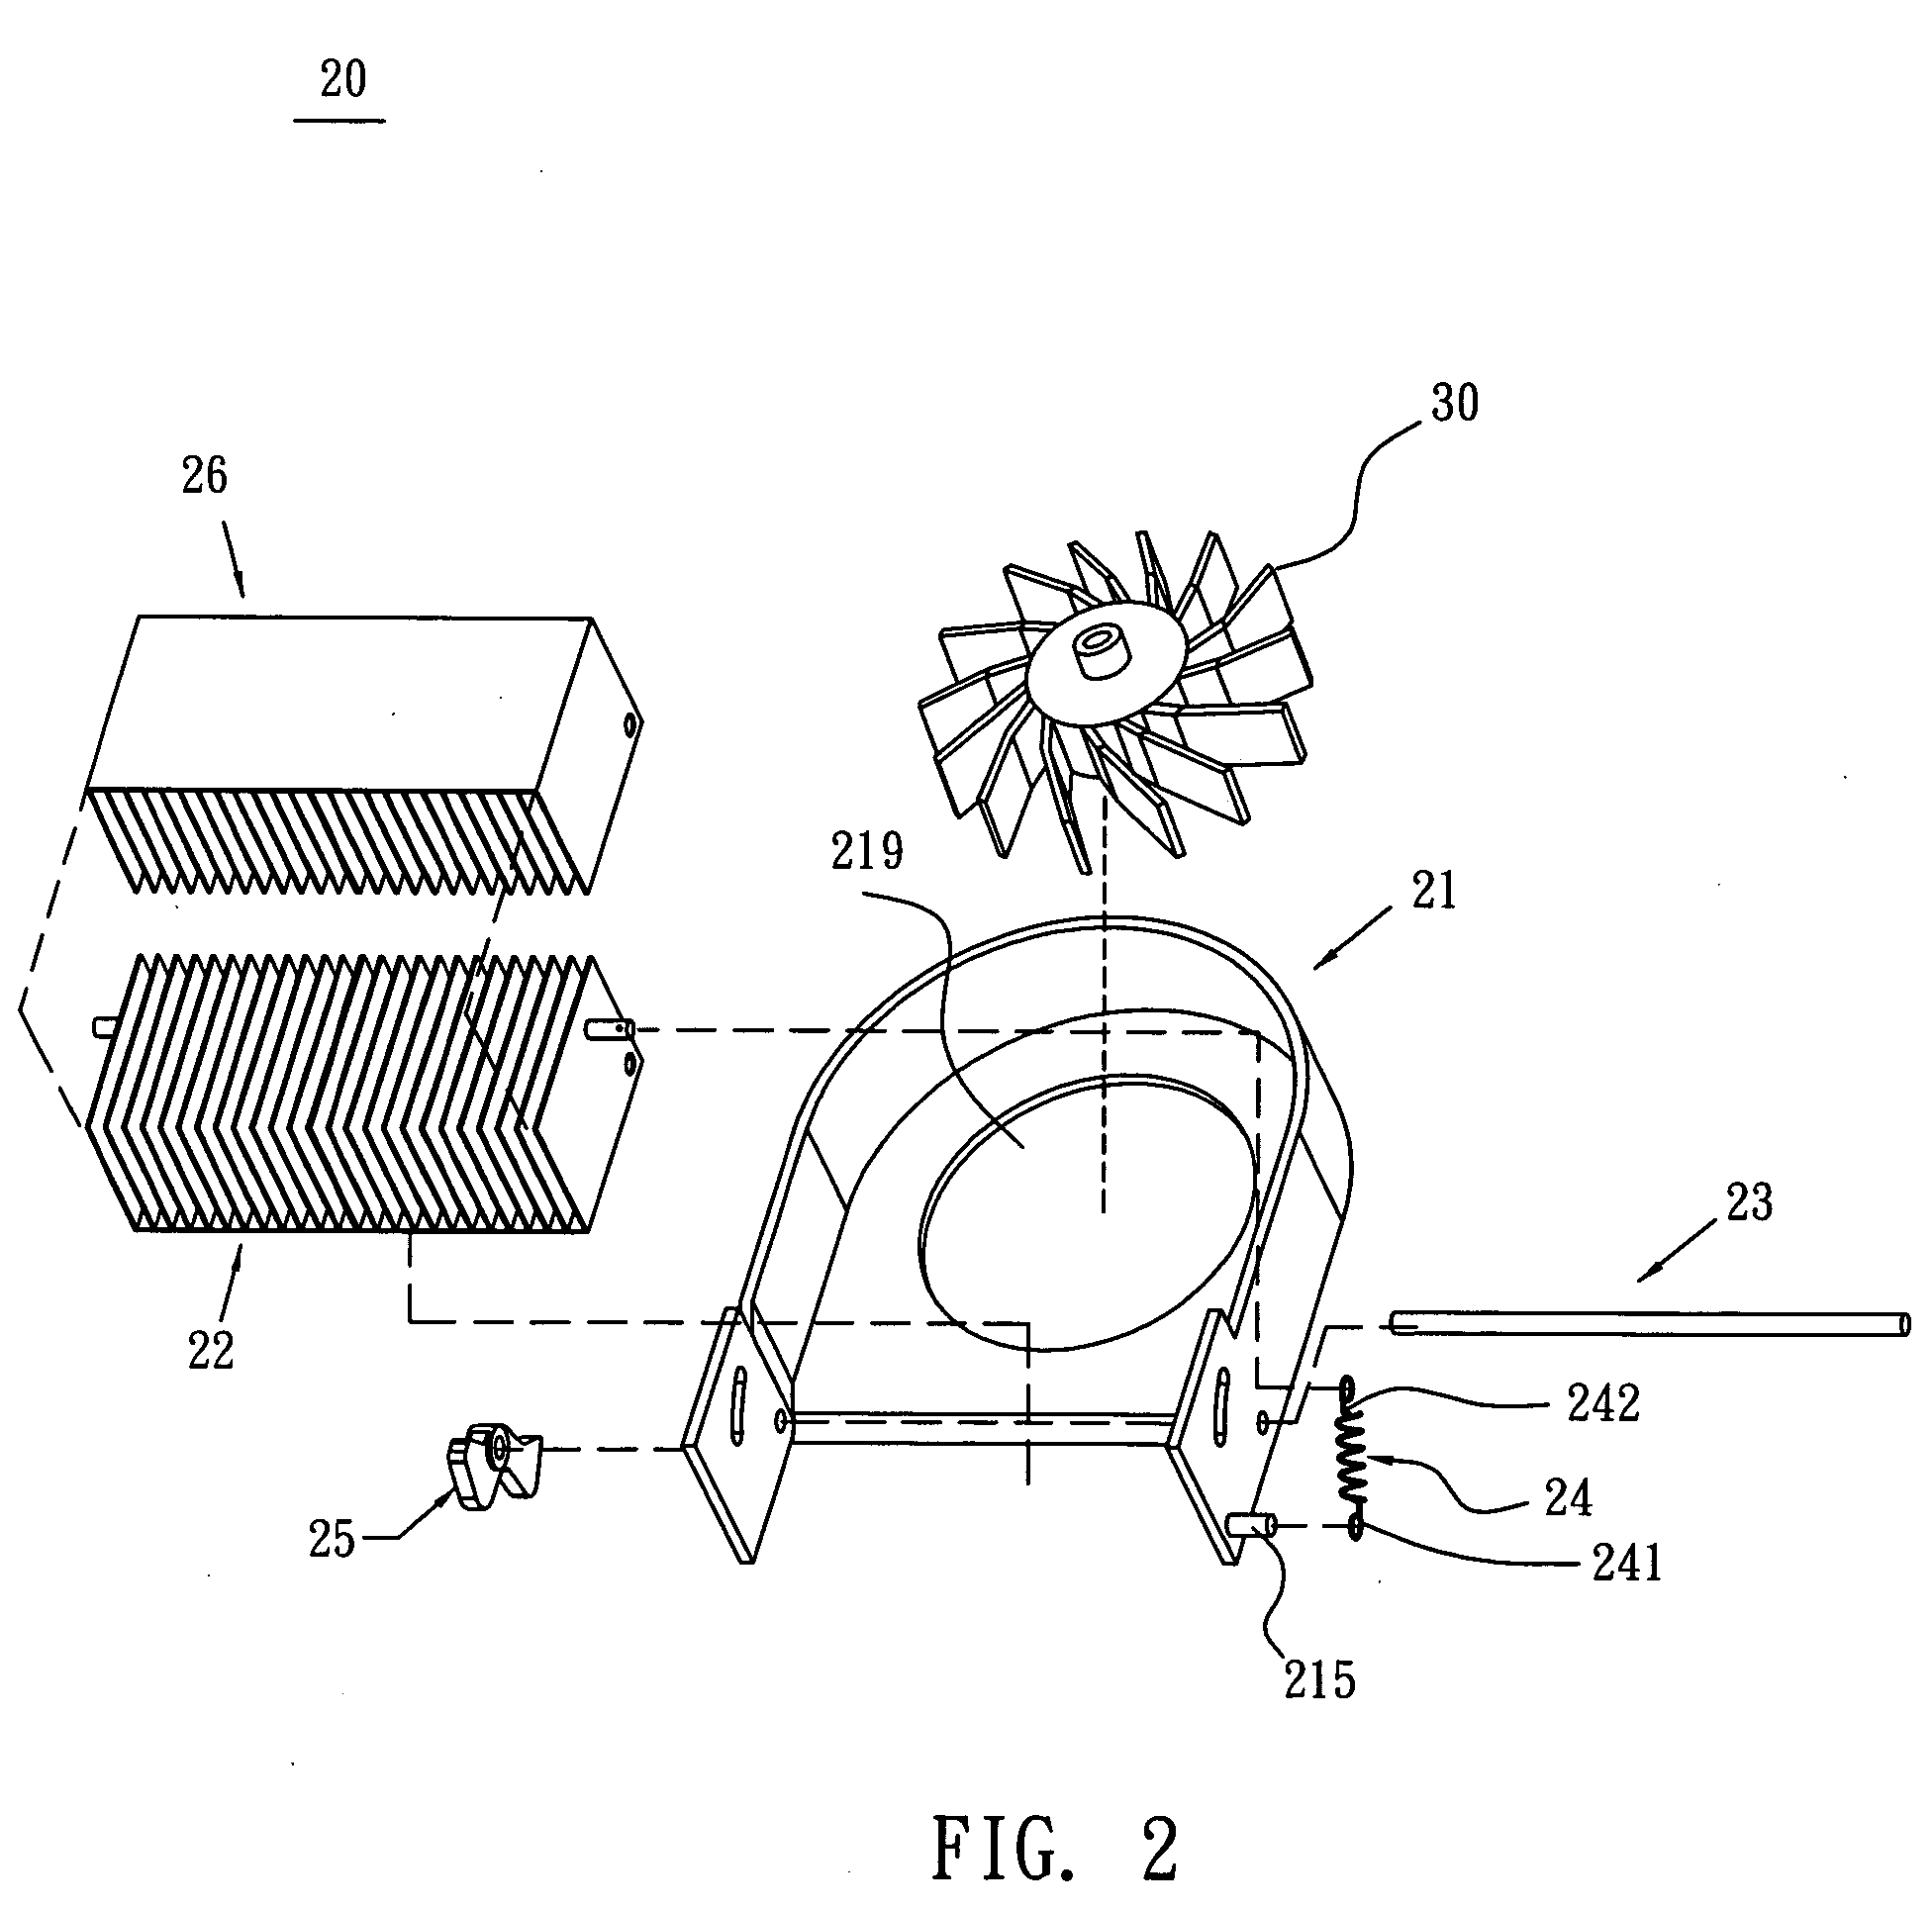 Heat sink assembly with rotatable fins